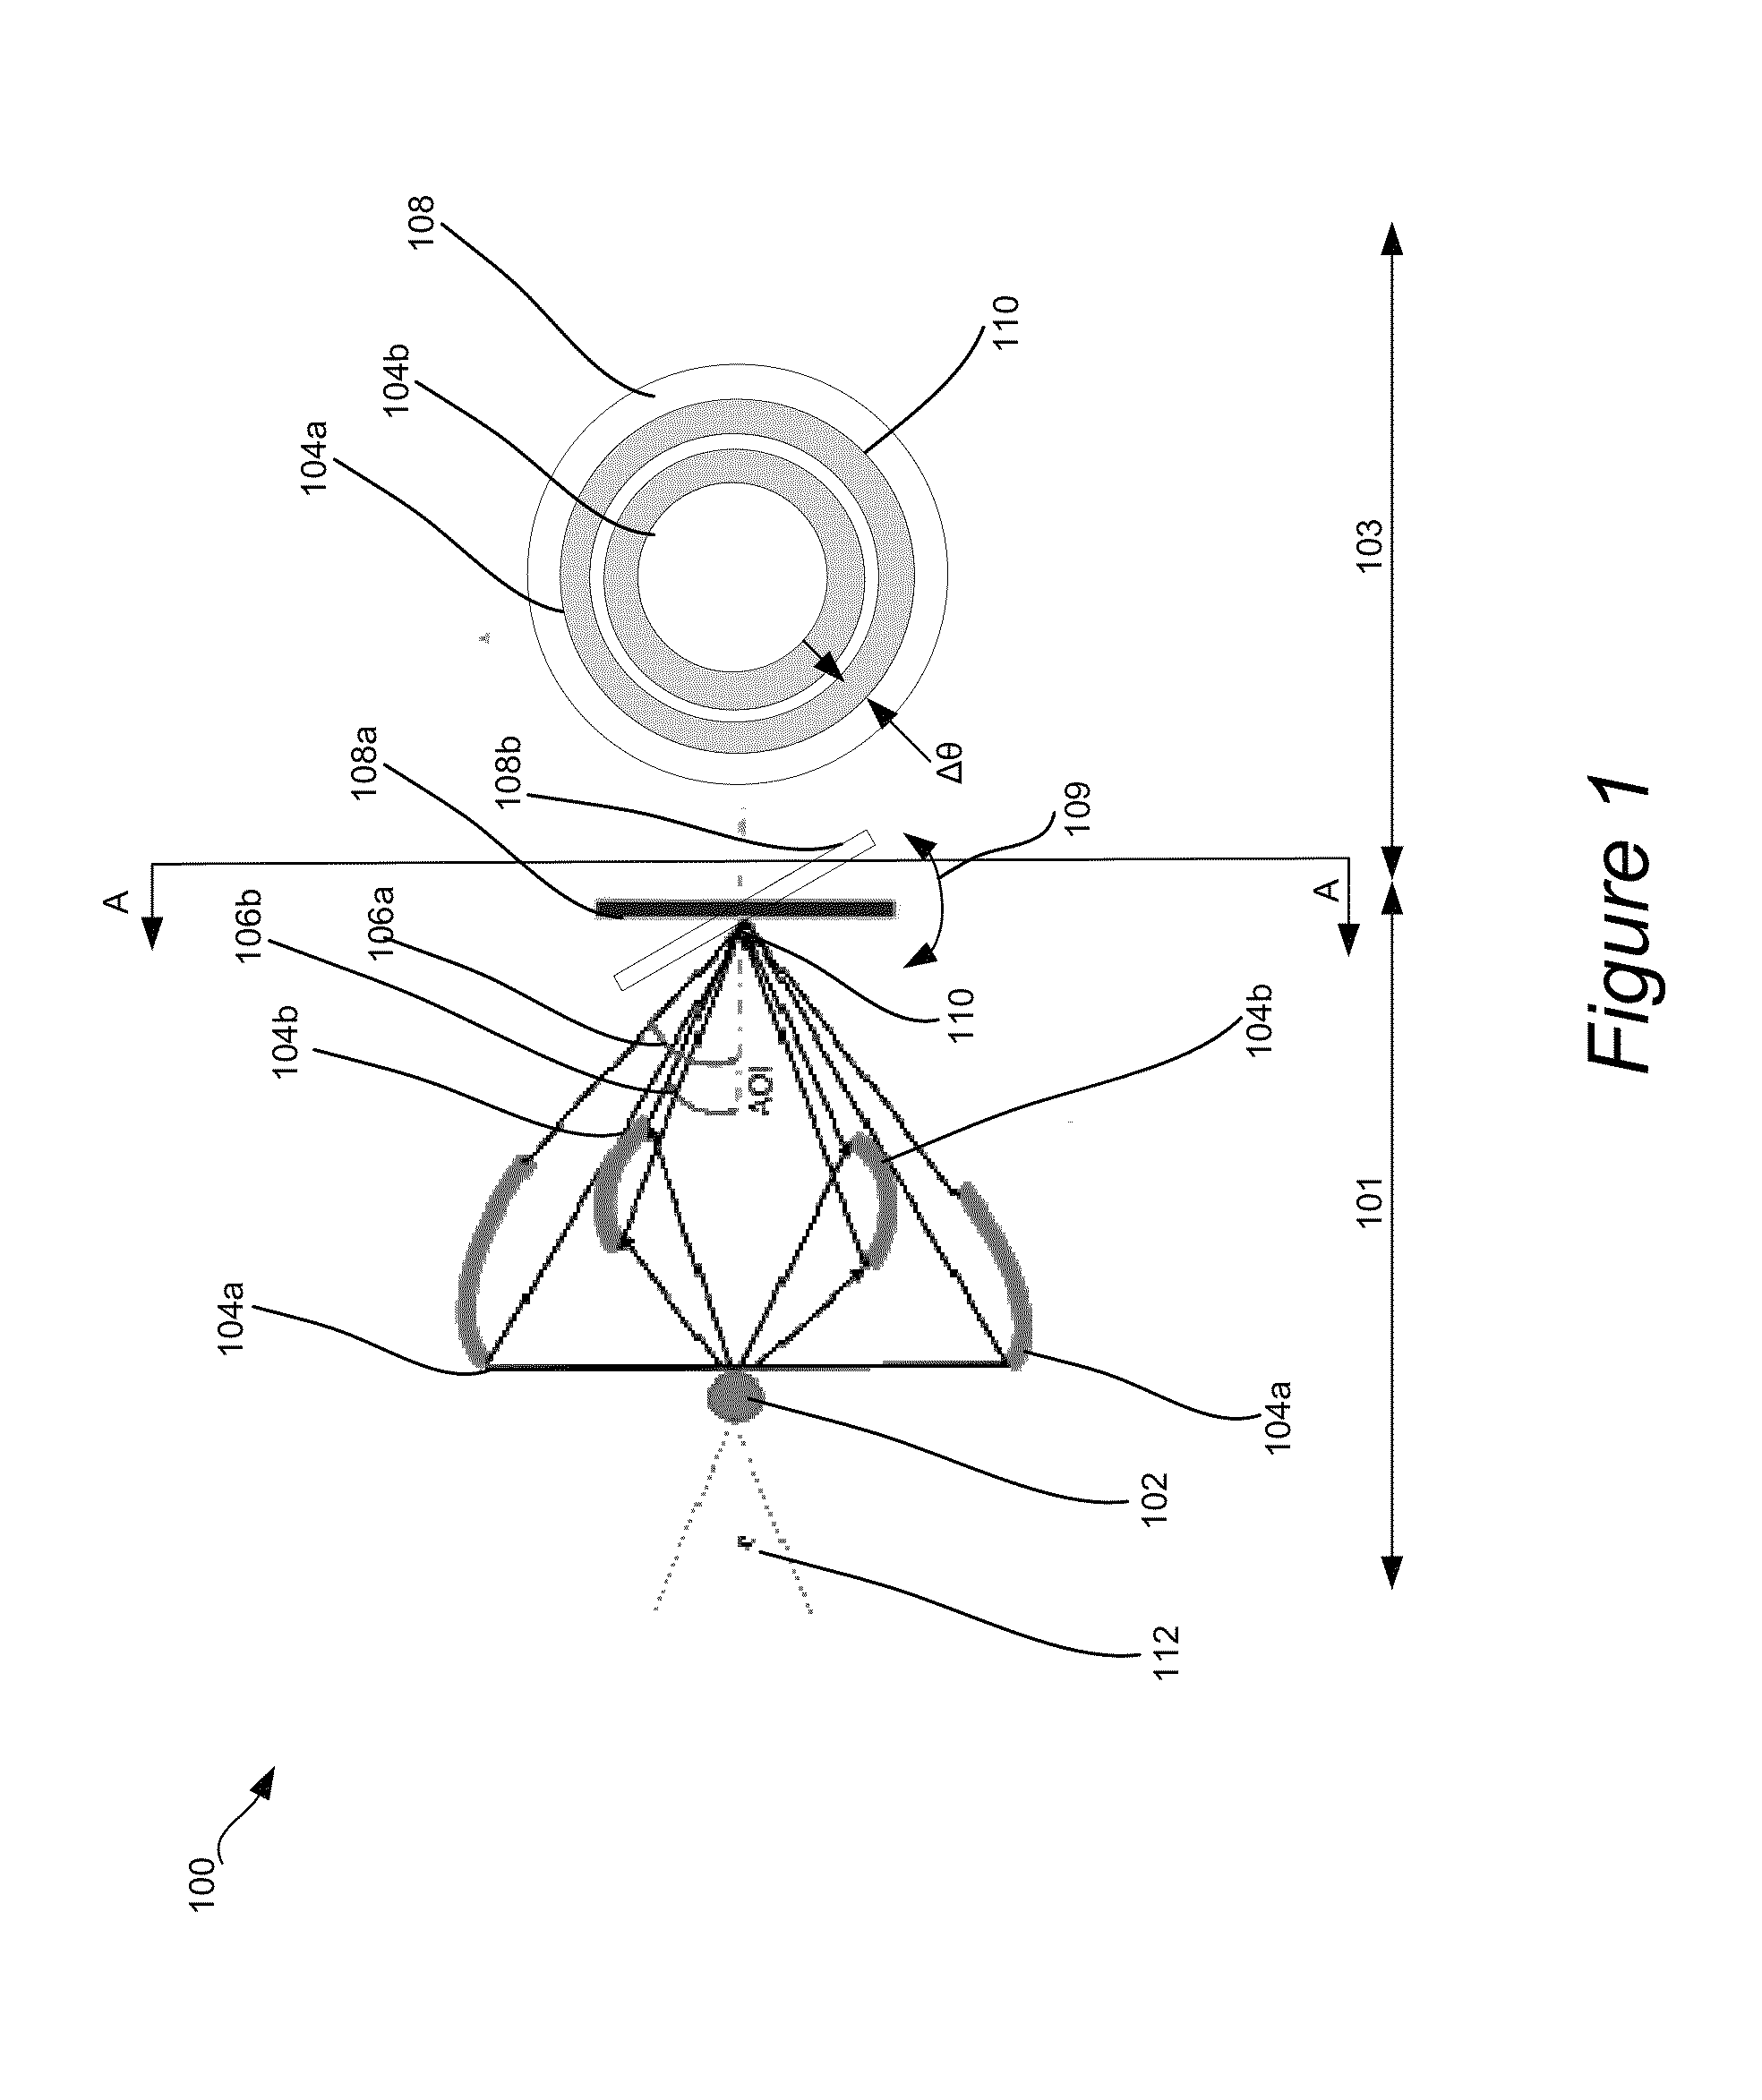 Small-angle scattering x-ray metrology systems and methods